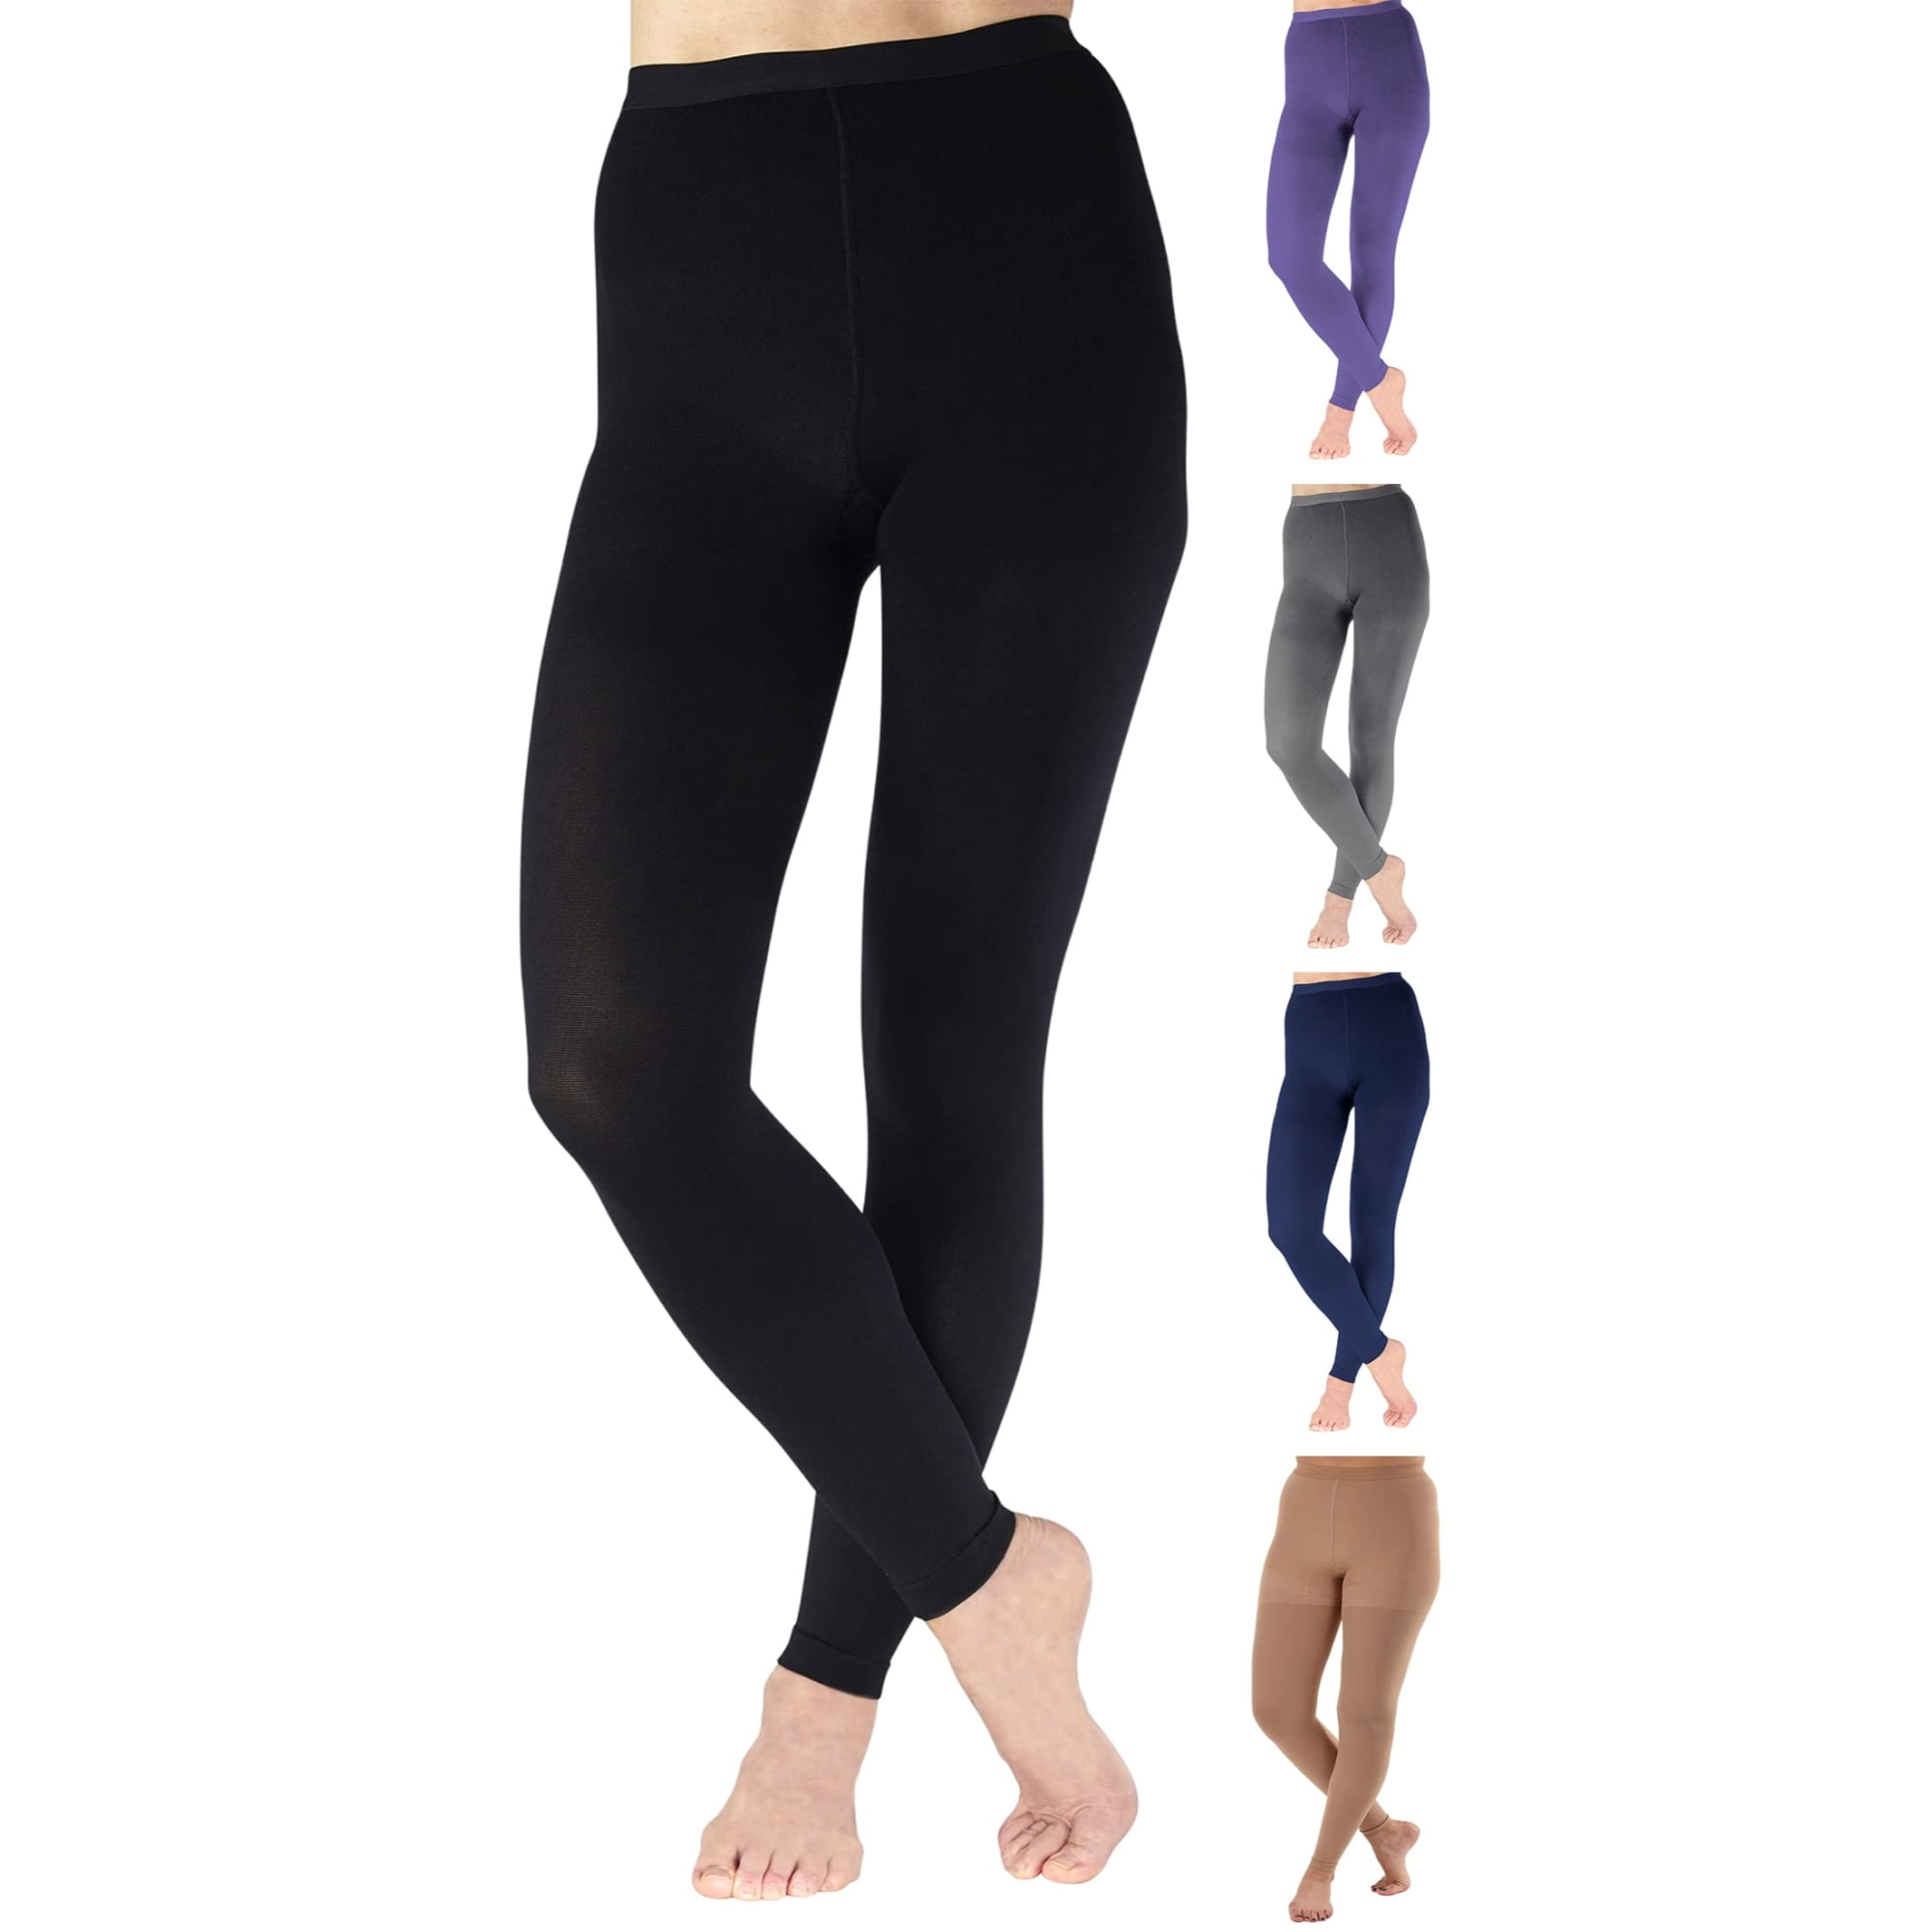 3XL Plus Size Womens Footless Compression Tights 20-30mmHg - Black, 3X-Large